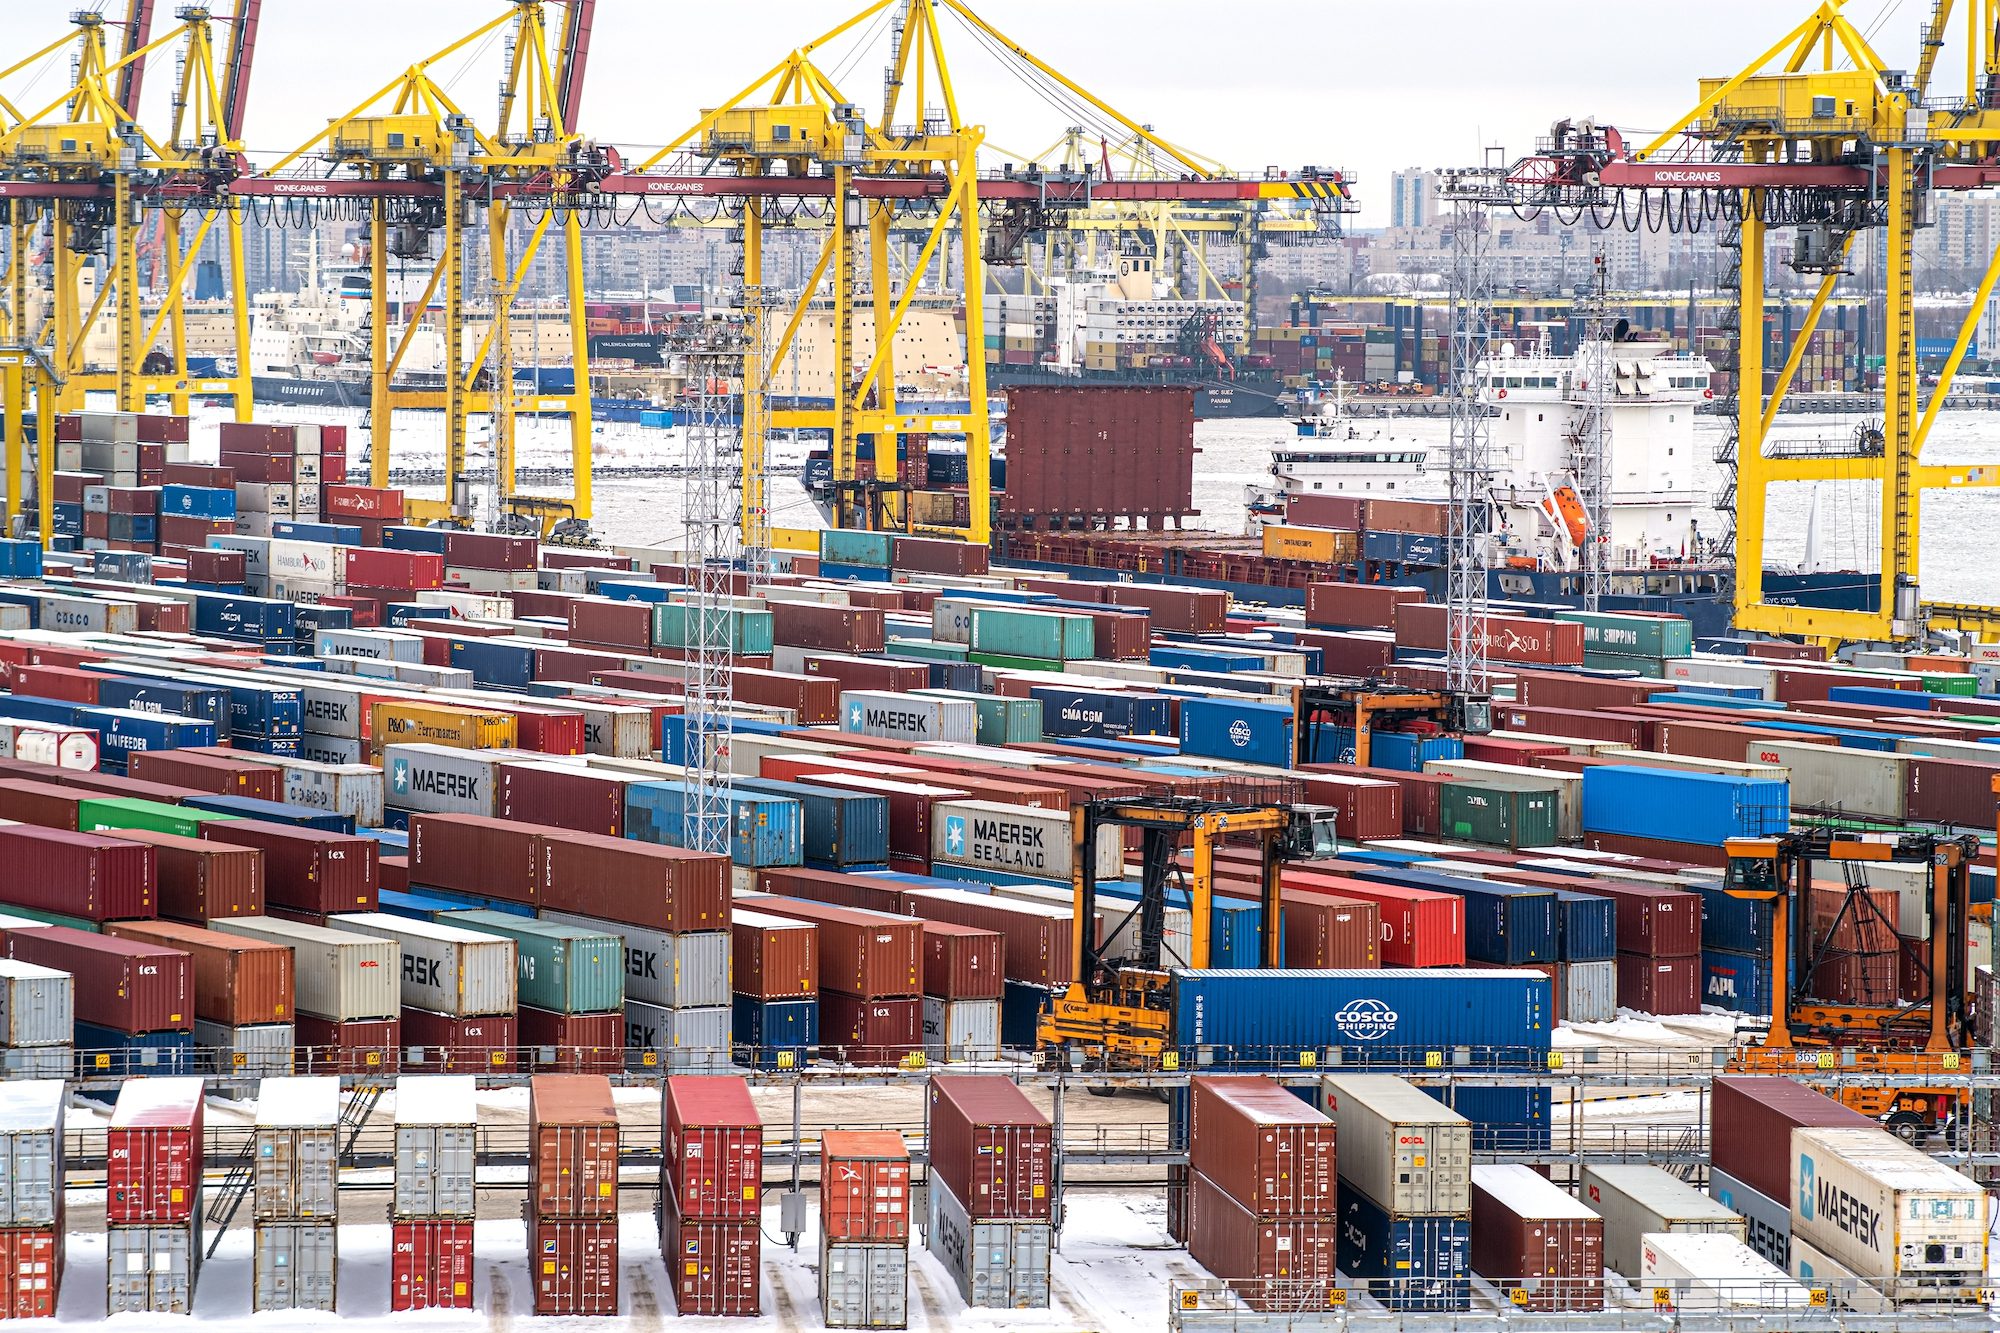 A container terminal at the Port of Saint-Petersburg, Russia. January 9, 2023